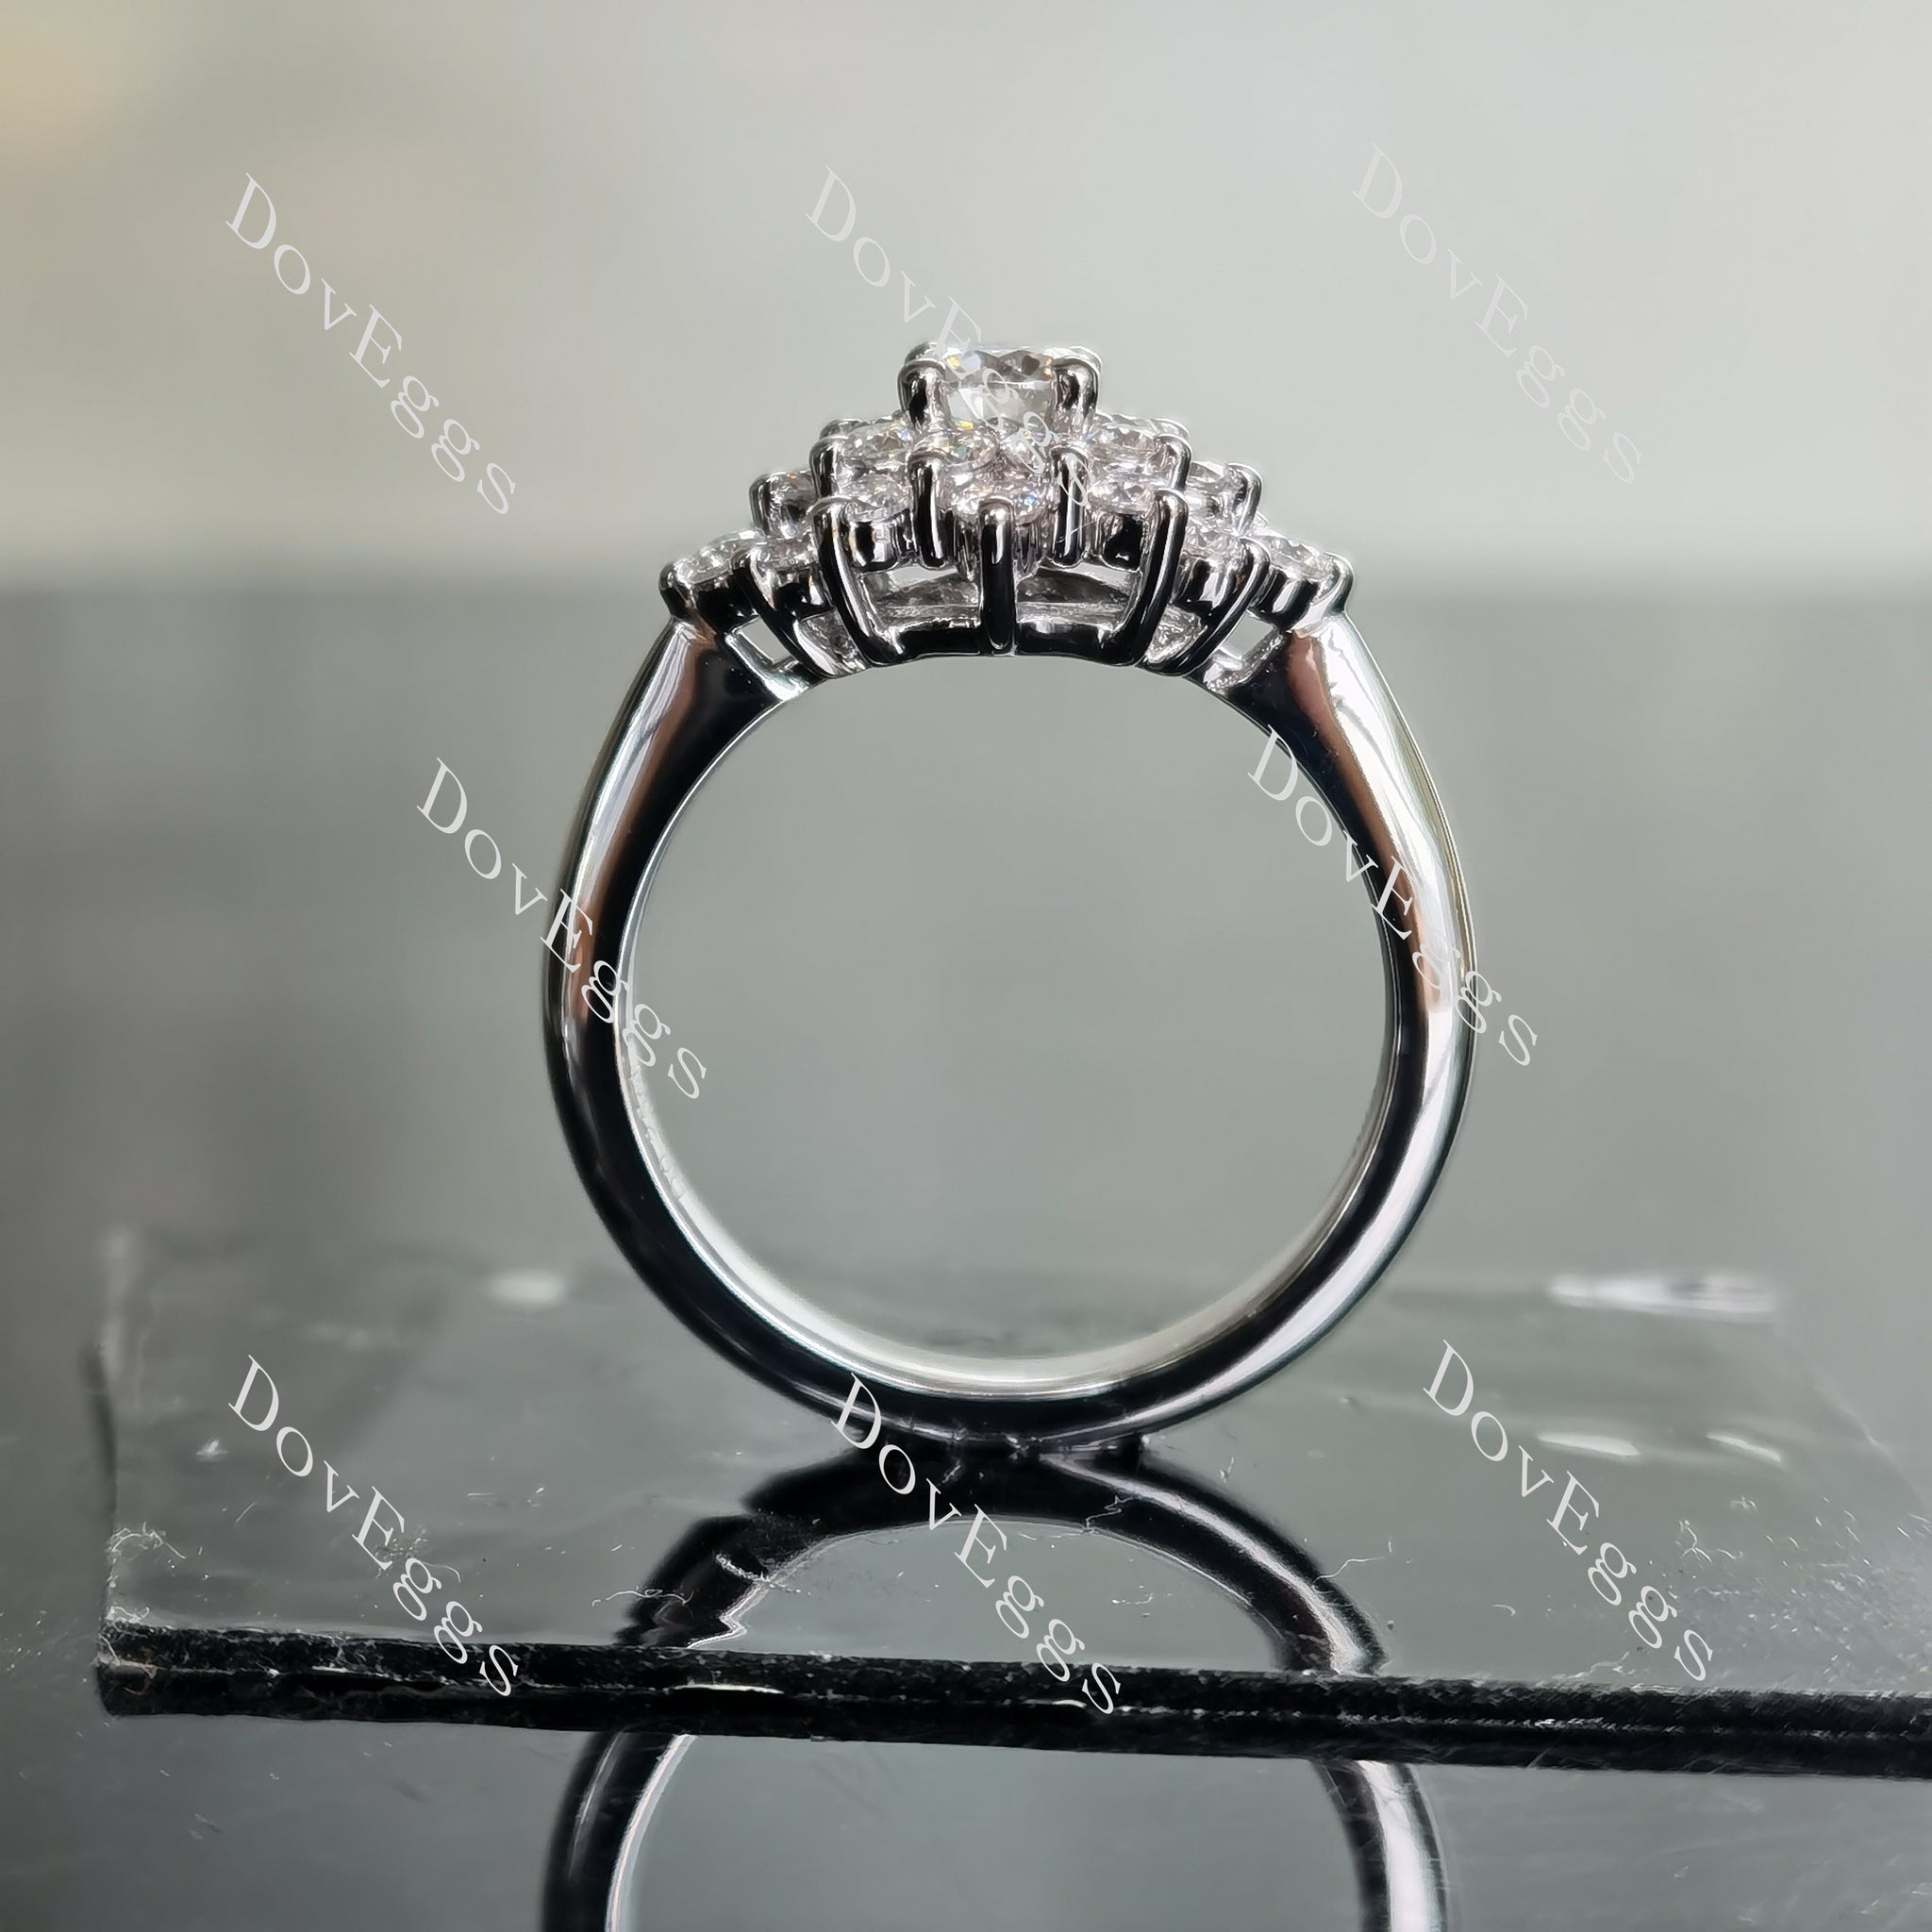 DovEggs round floral halo moissanite engagement ring